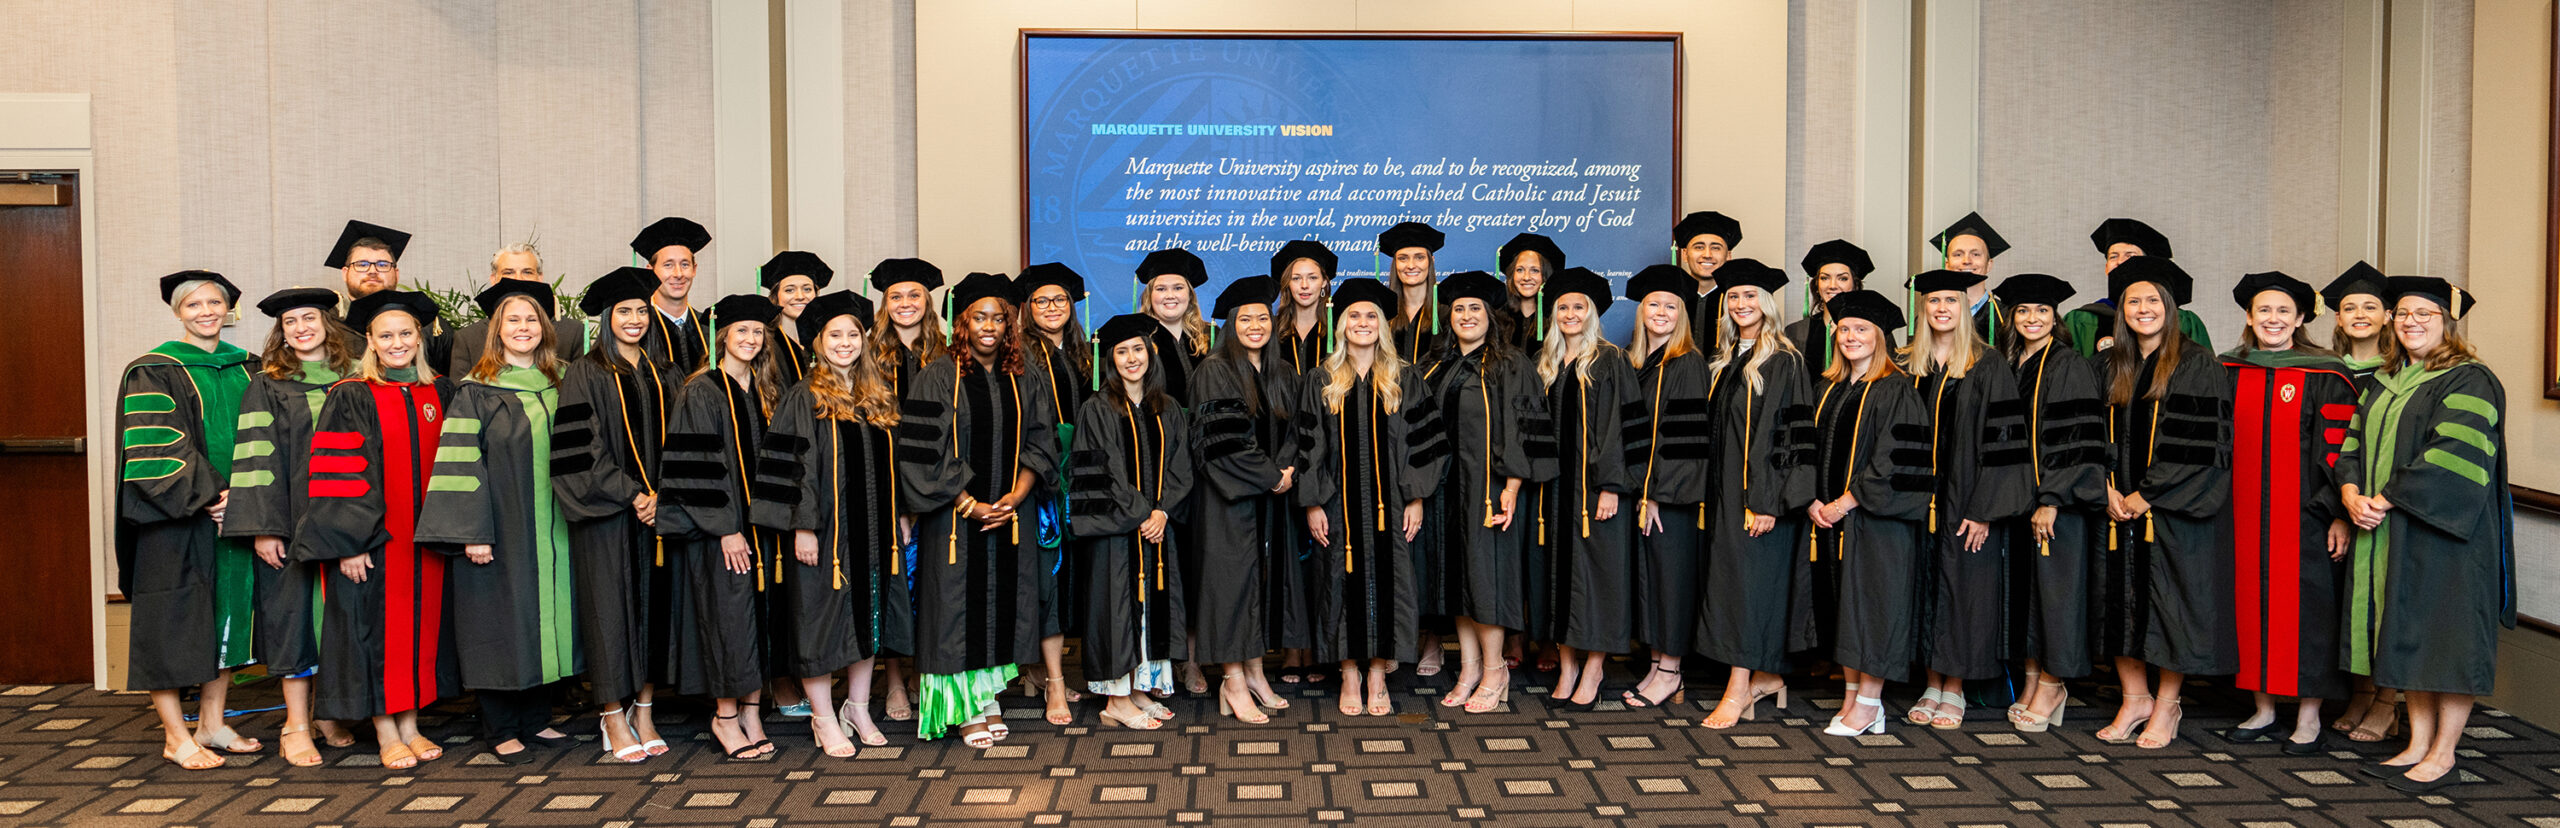 The inaugural Occupational Therapy graduating class 